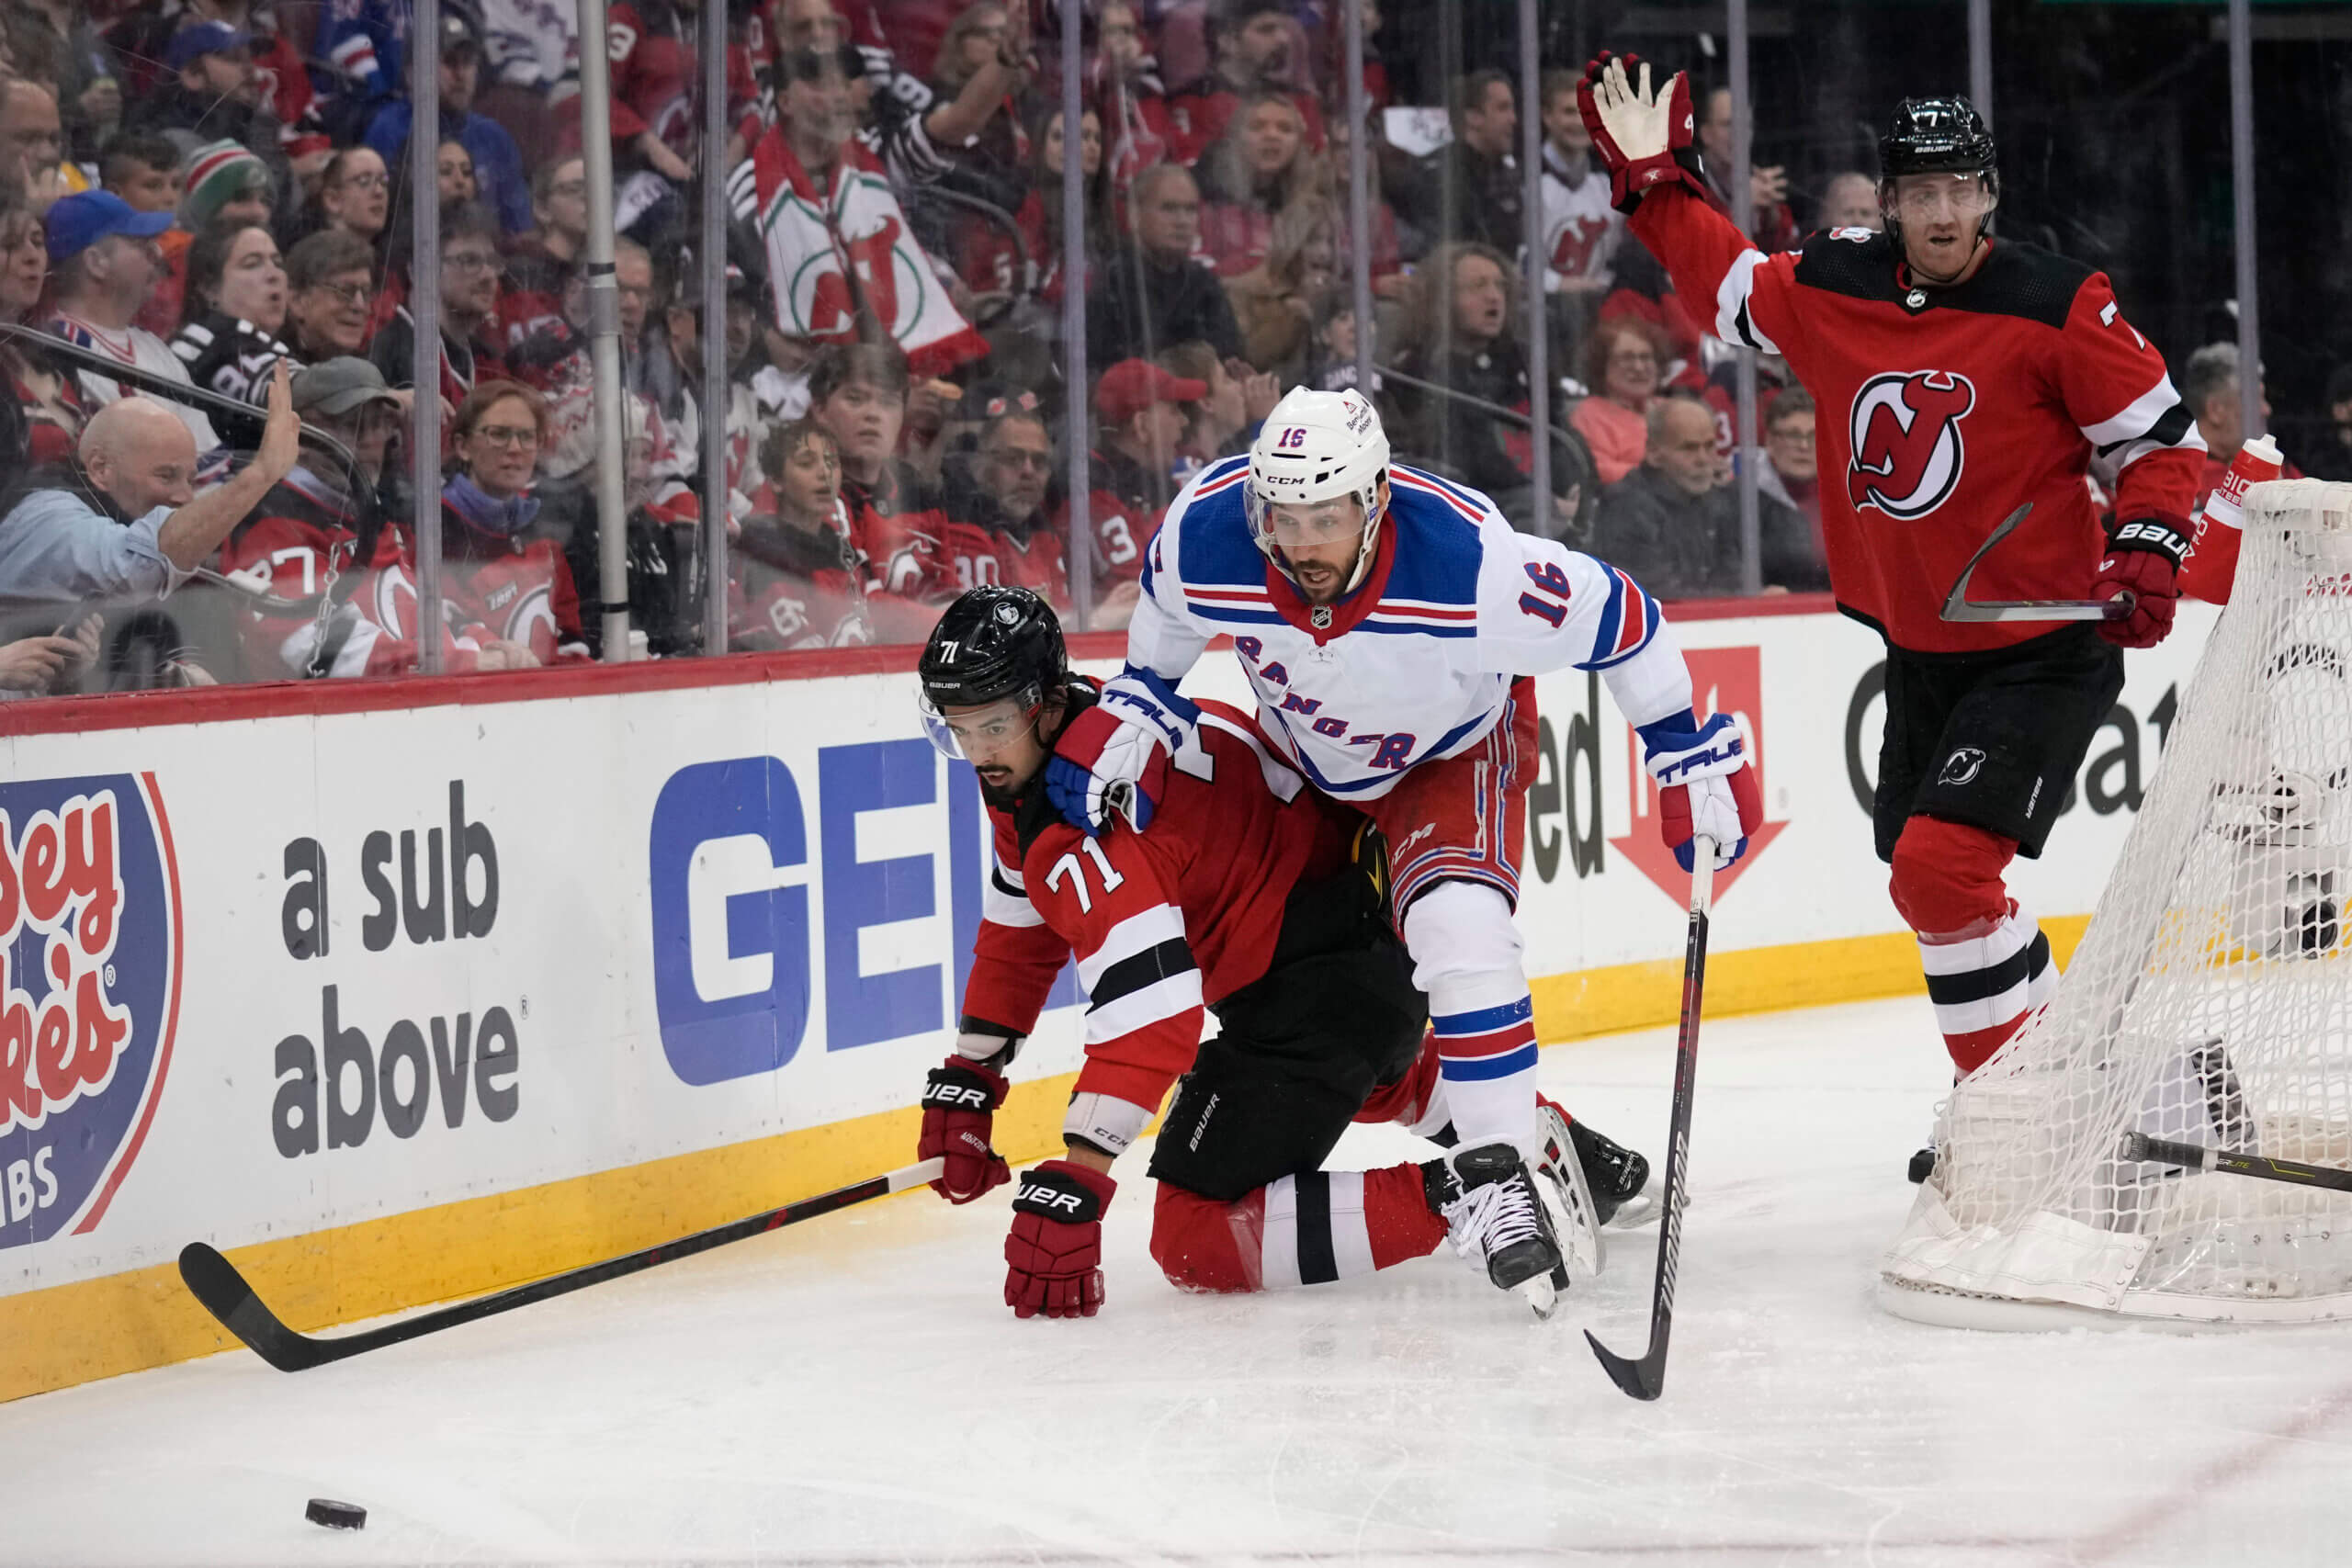 NHL playoffs: Devils showin why they're a real Stanley Cup threat